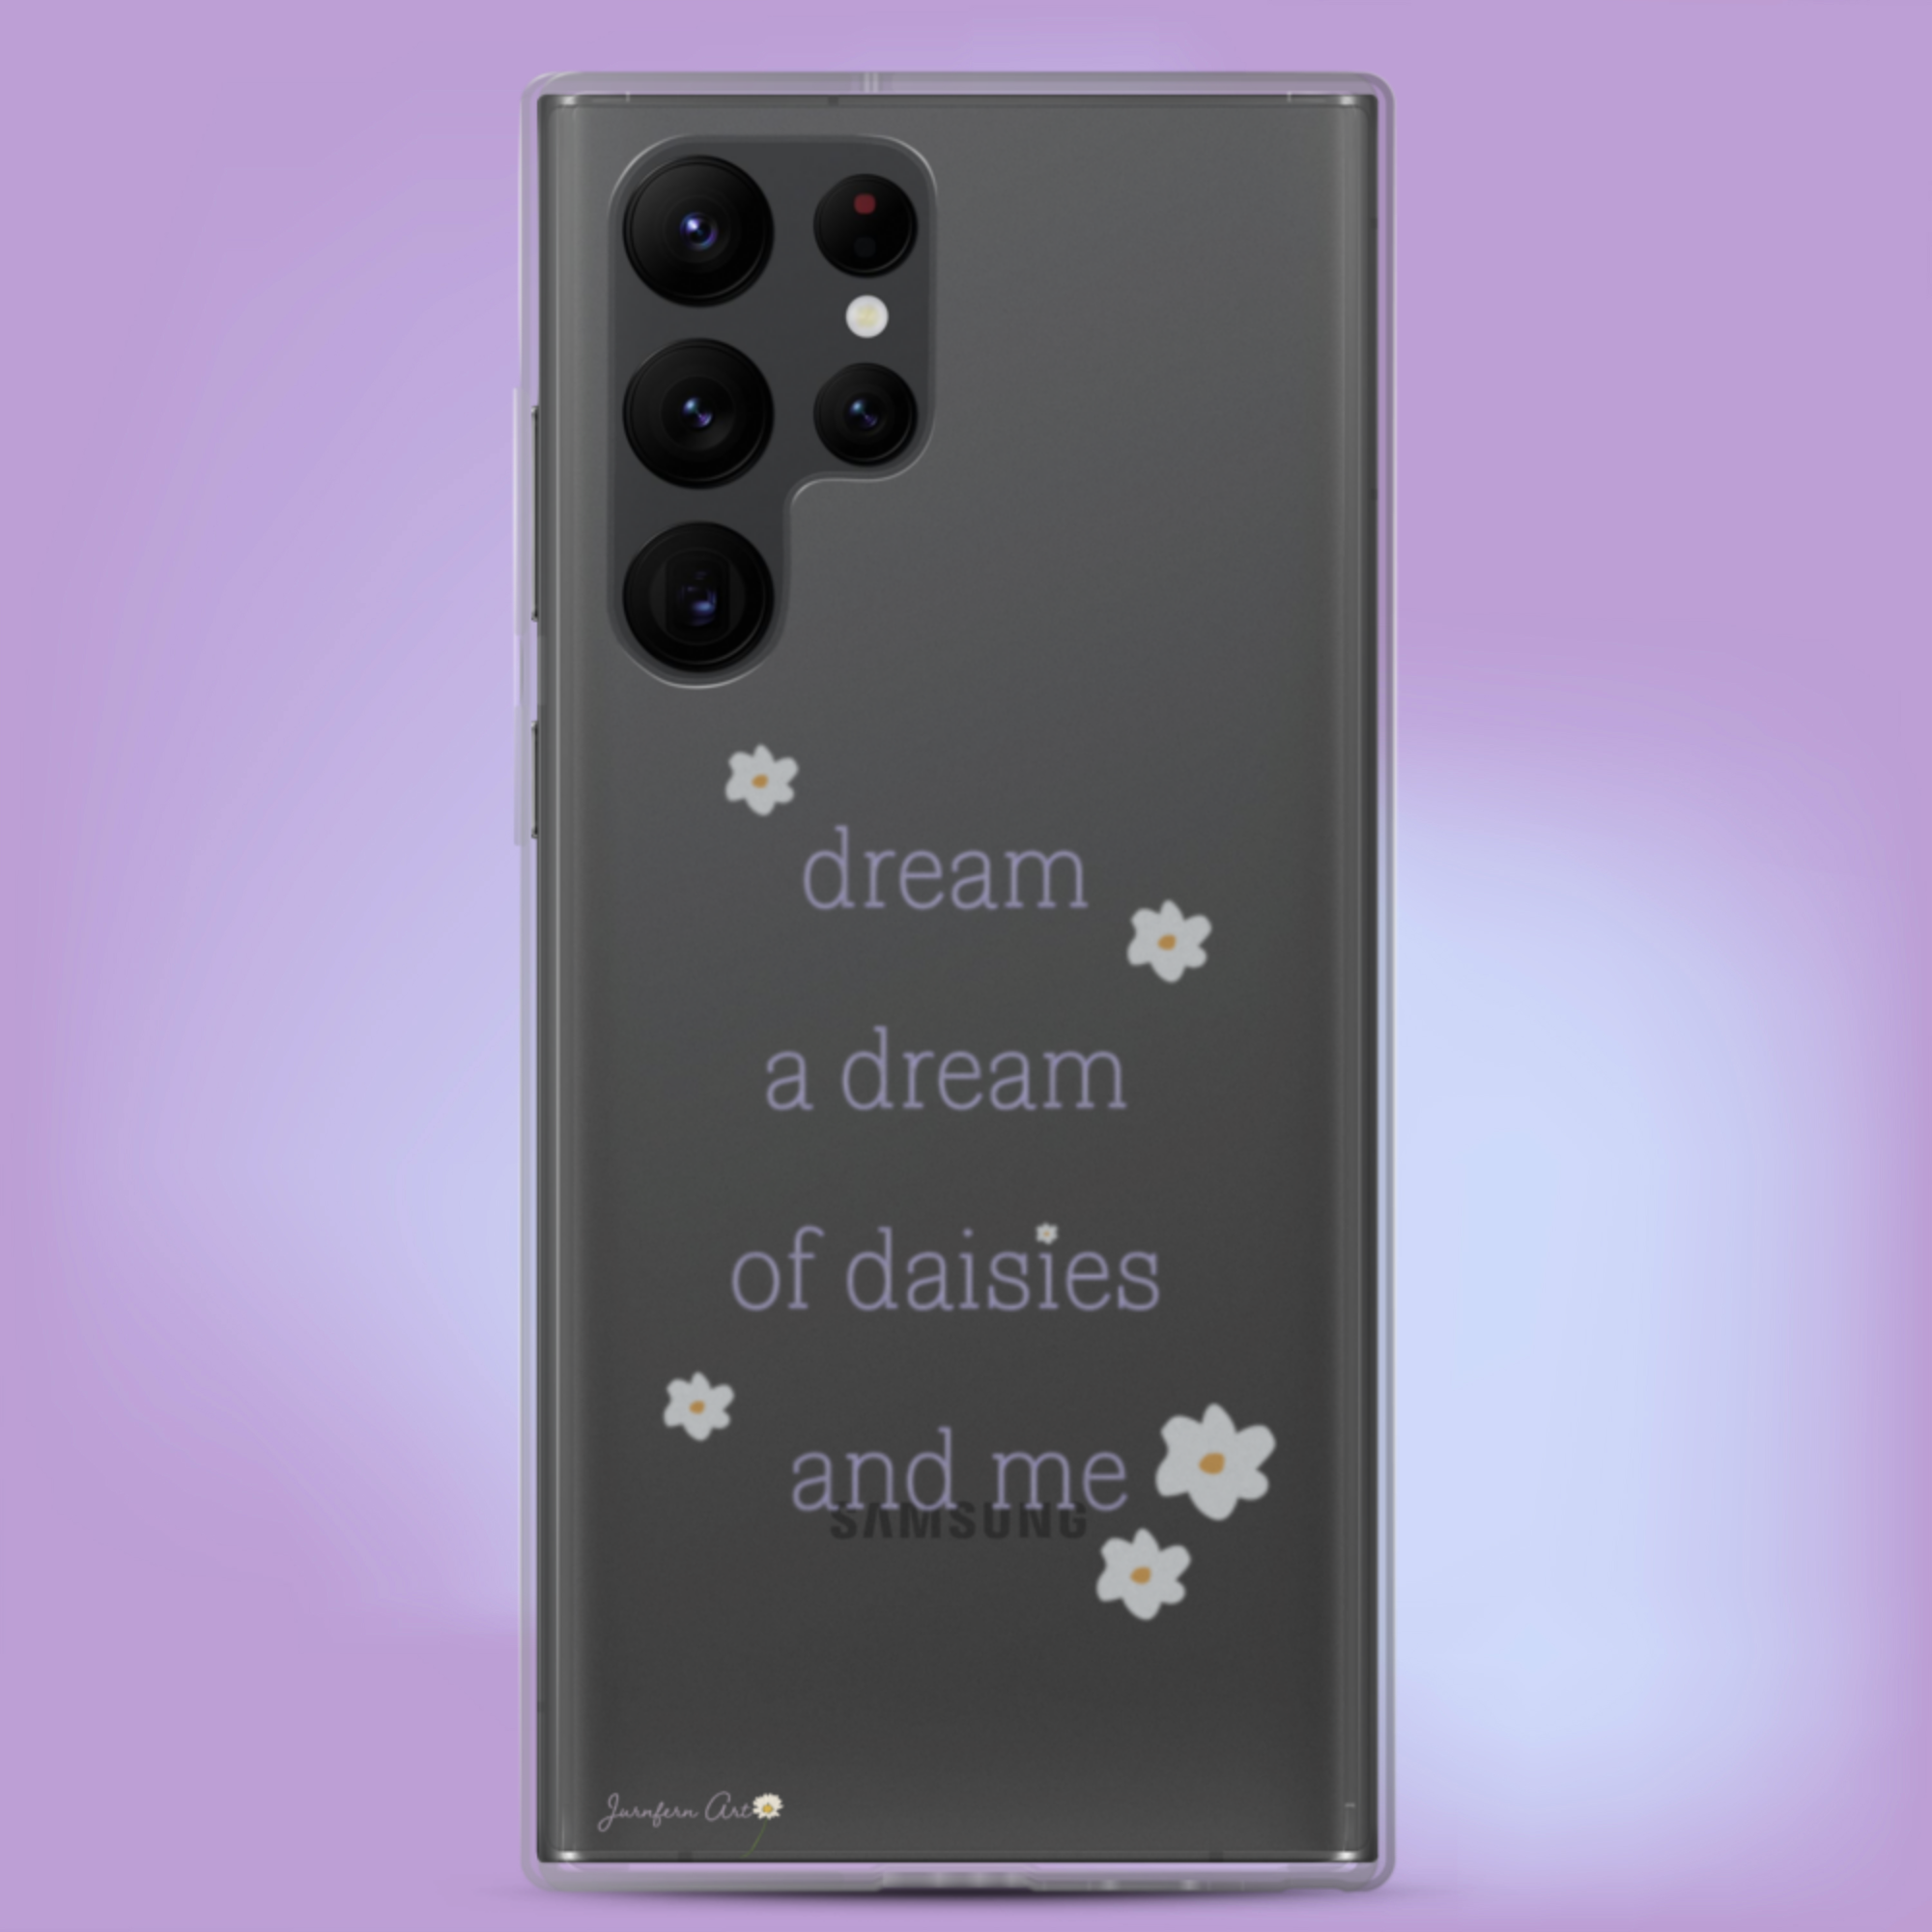 A transparent Samsung Galaxy S22 Ultra phone case with lavender text on it that reads "dream a dream of daisies and me" surrounded by small daisies